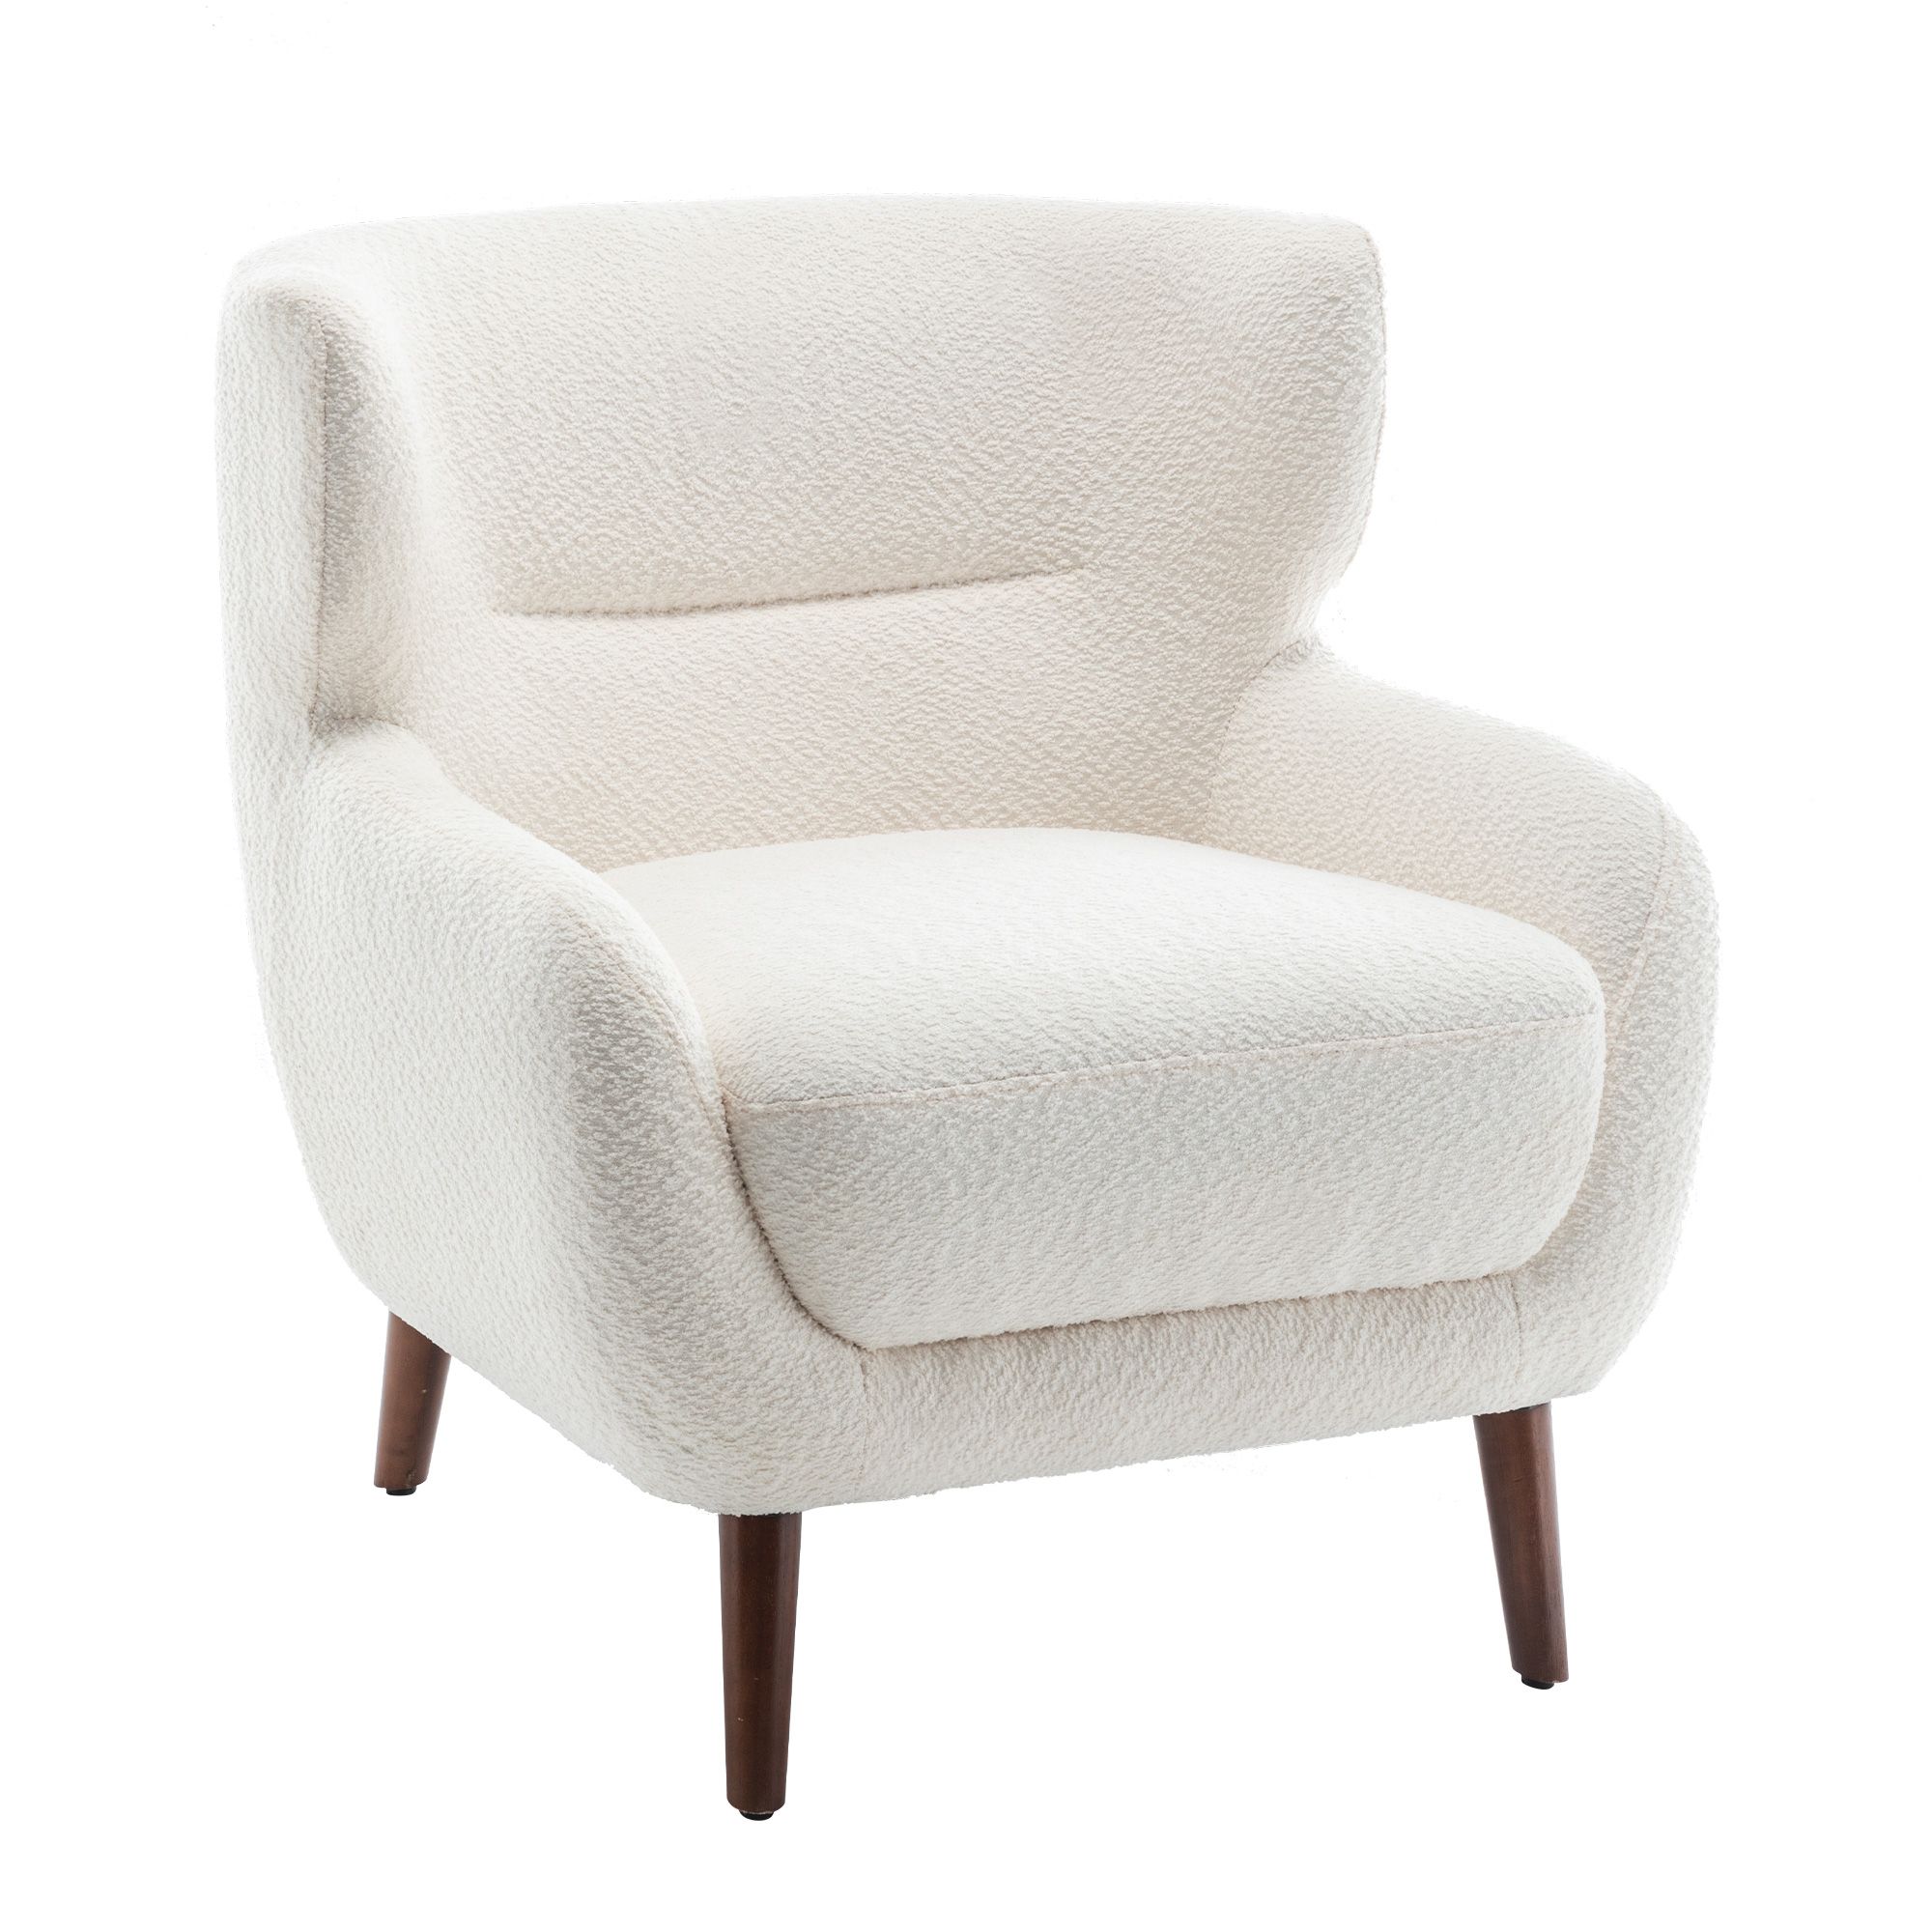 XINMICS White Tufted Accent Chair, Wingback Upholstered Armchair with Solid Wood Legs | Walmart (US)